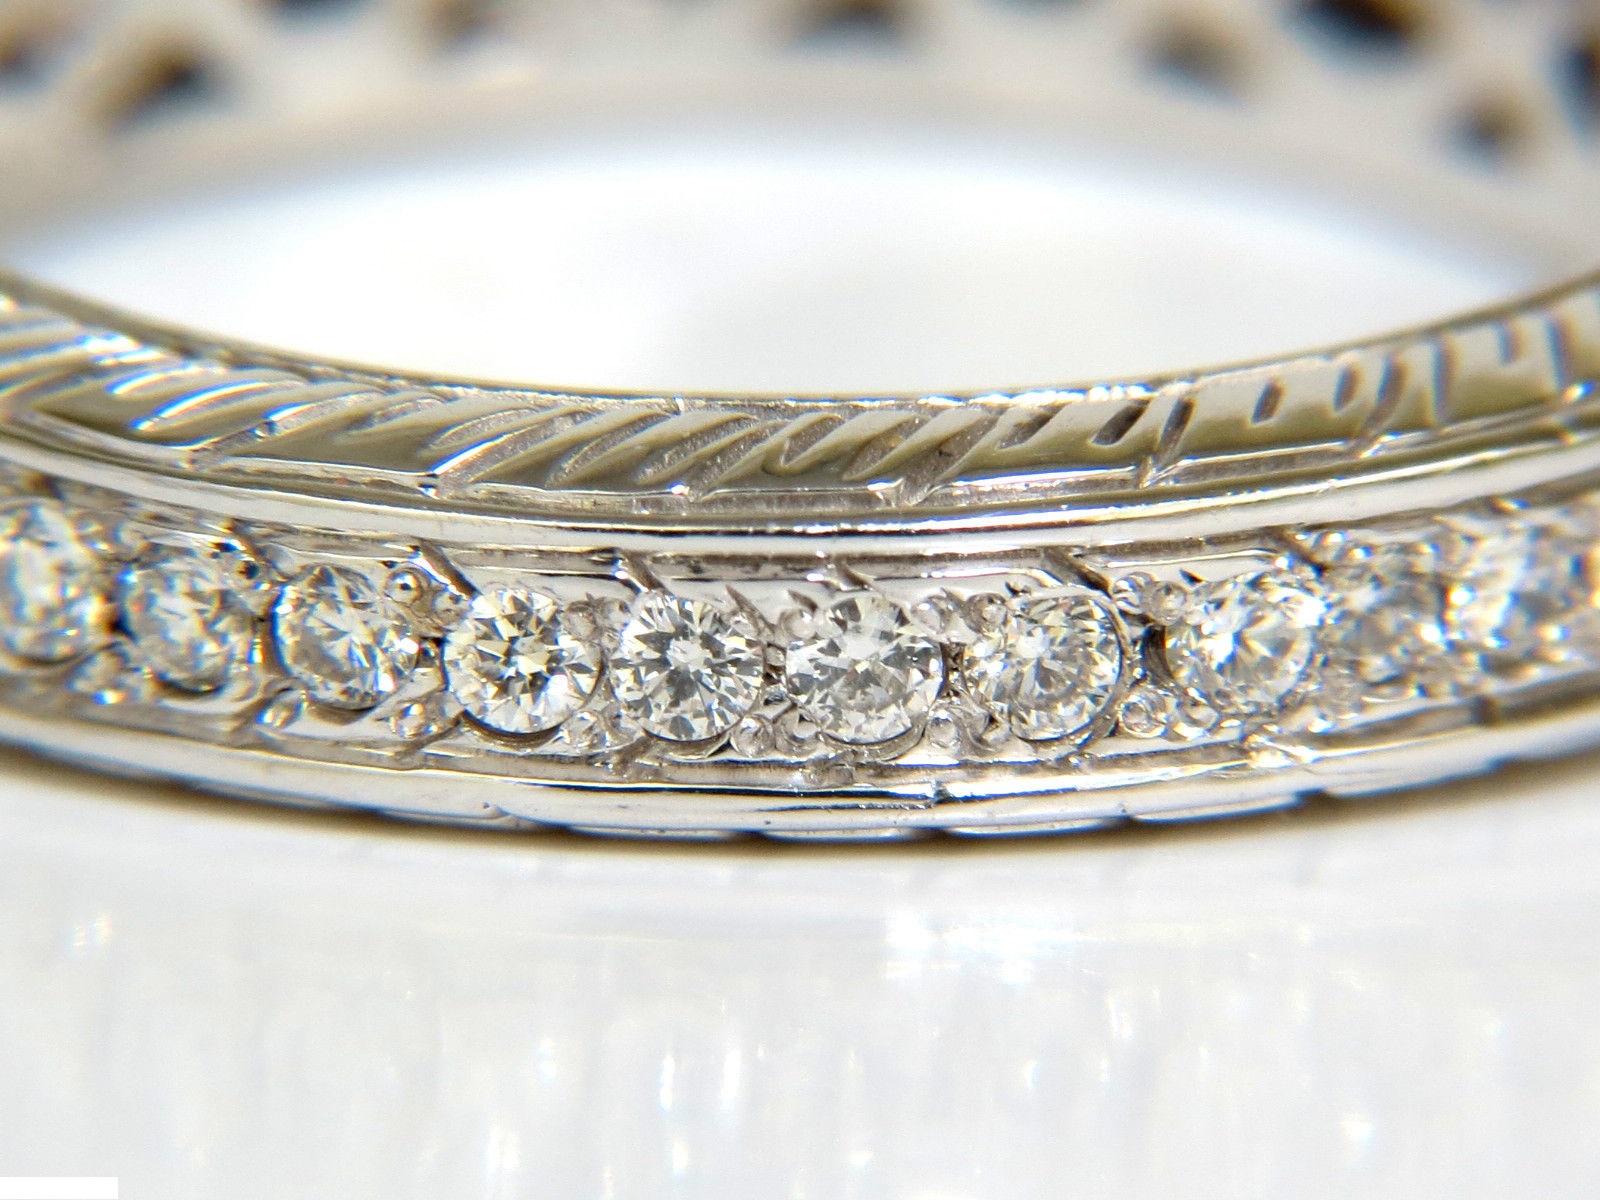 1.50ct. Diamonds eternity band 

Rounds & Full Cuts 

F-G color 

Vs-1 clarity

french pave hand-set

6.5 grams

Size 9.5 and may not resize.

Gorgeous scaling Gil Design on Profile 

Closed gallery inner for comfort 

4.30mm thick

2.60mm